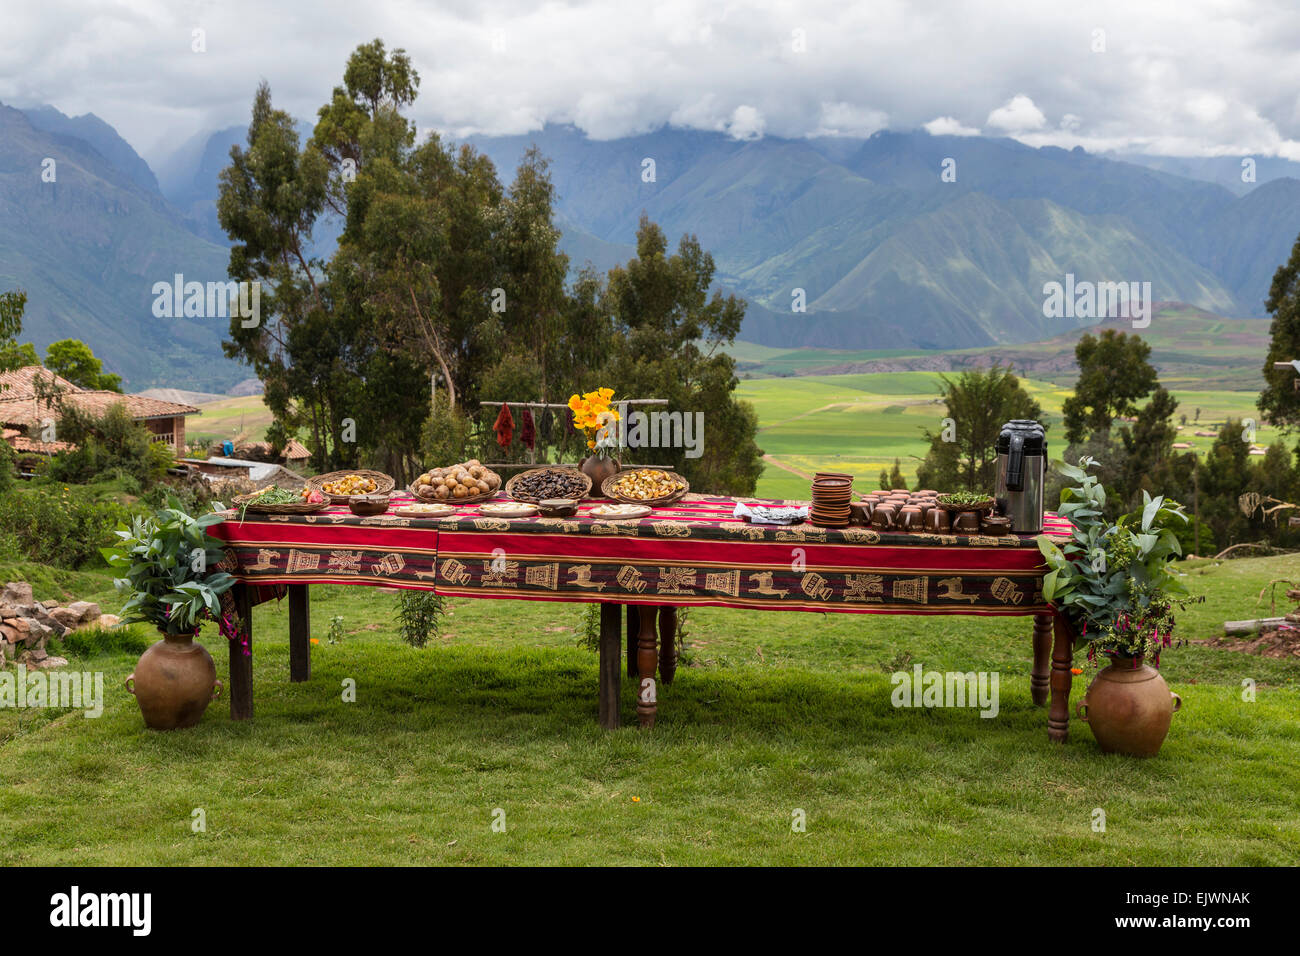 Peru, Urubamba Valley, Quechua Village of Misminay.  Cultural Tourism.  Villagers Display Local Agricultural  Products. Stock Photo